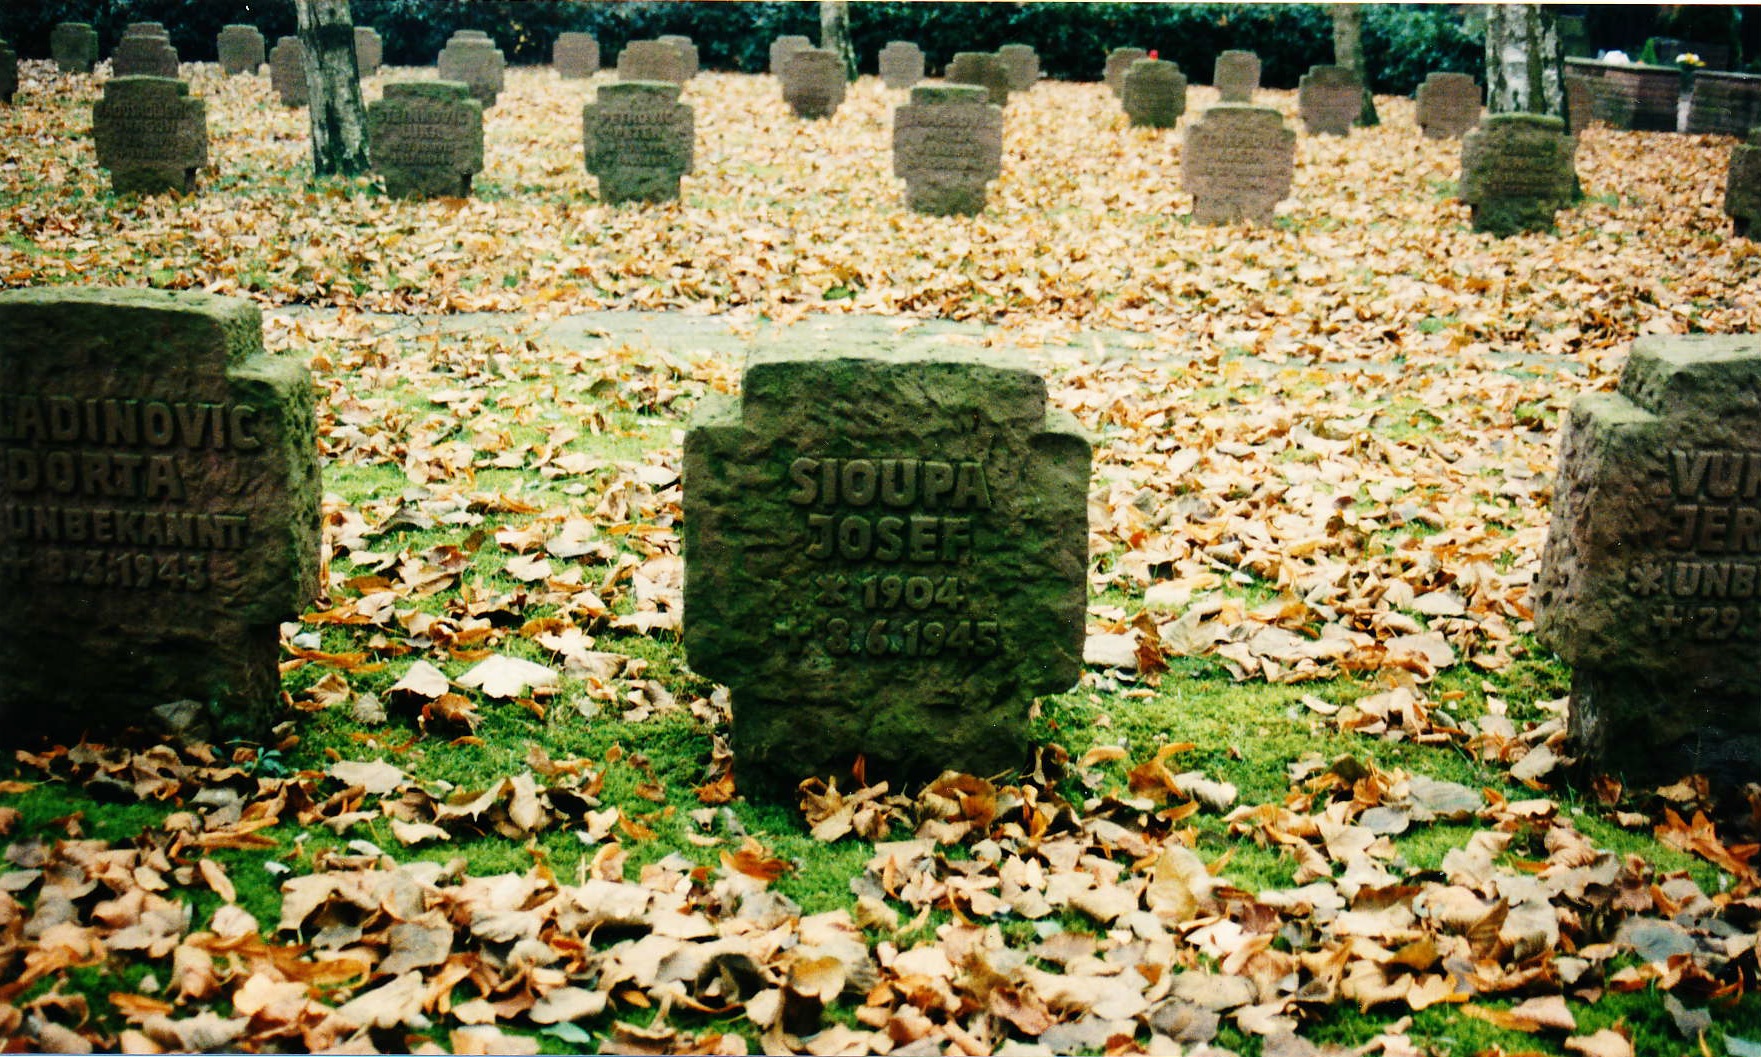 The only grave of the three polish soldiers, which were burried in Lingen